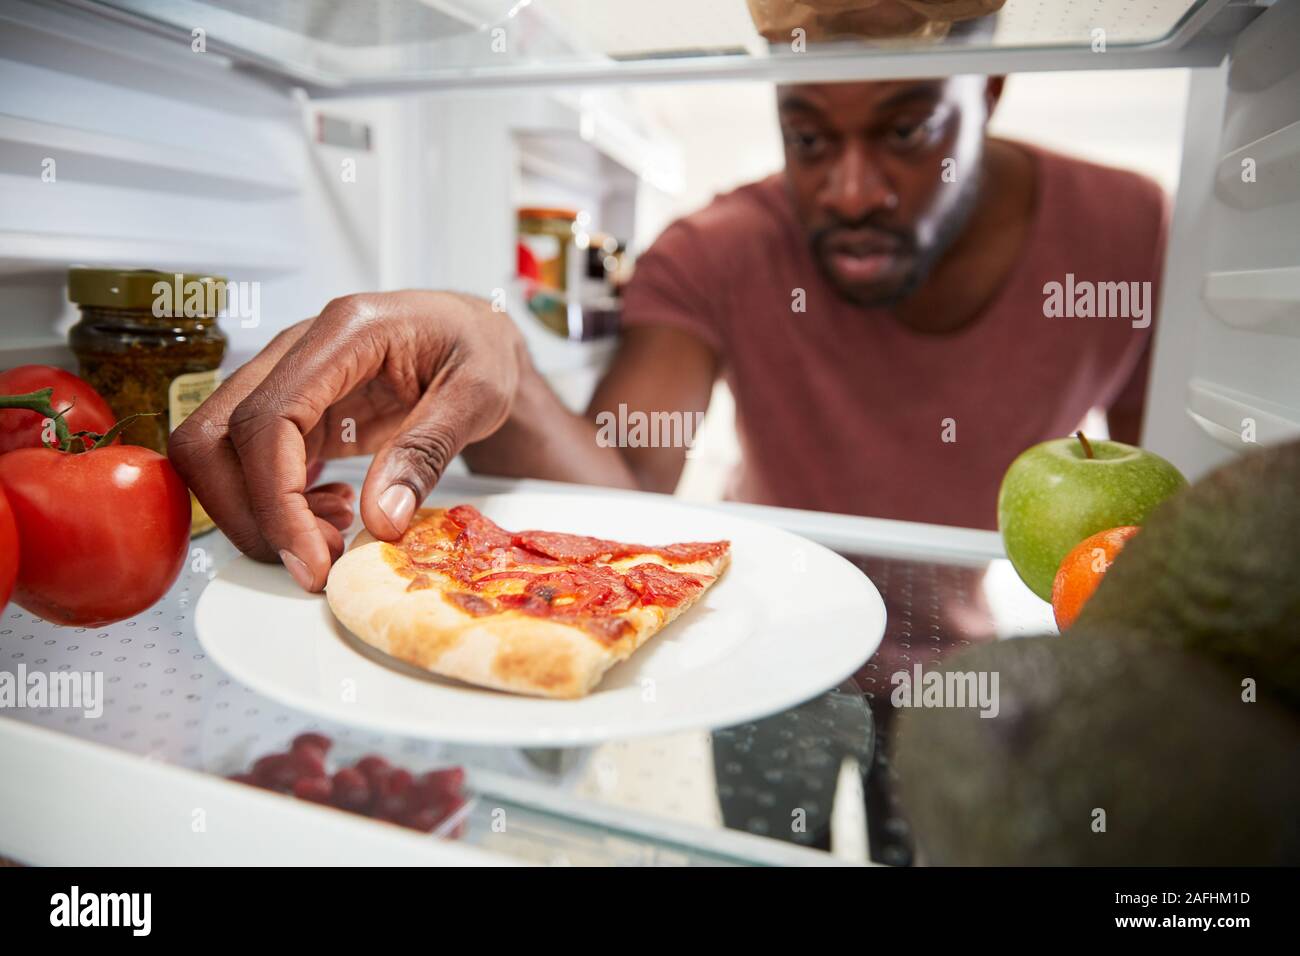 View Looking Out From Inside Of Refrigerator As Man Opens Door For Leftover Takeaway Pizza Slice Stock Photo